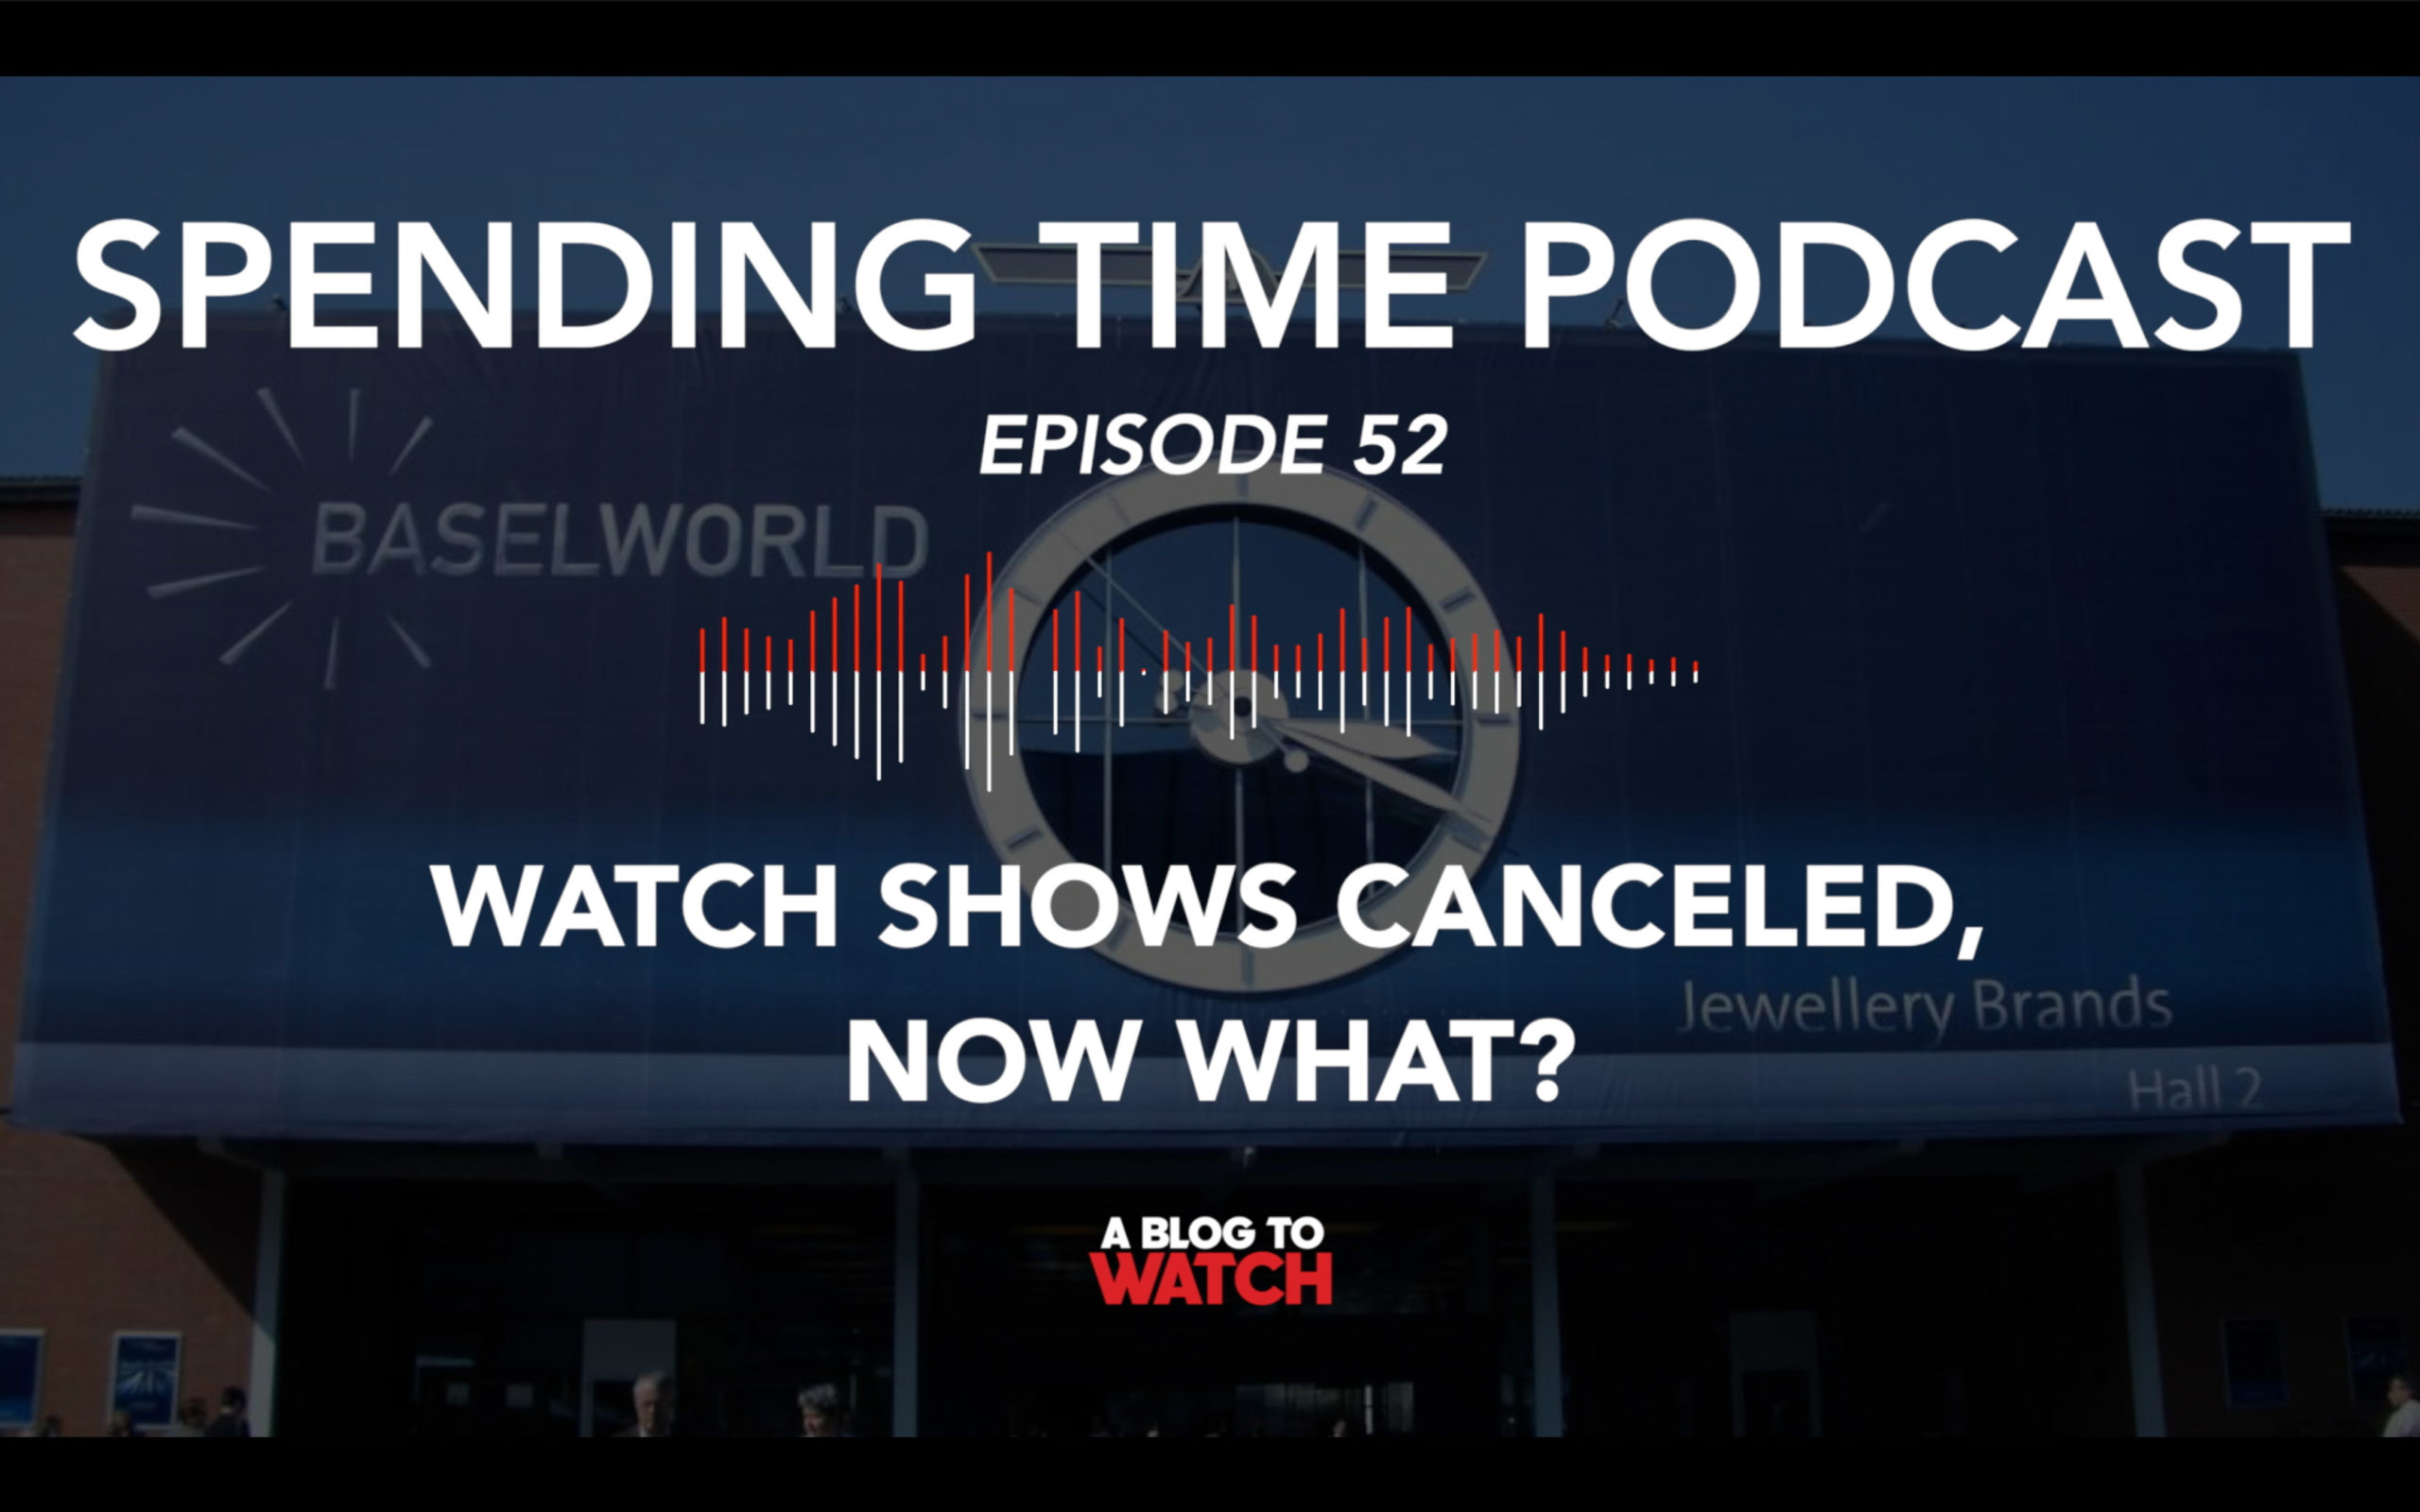 Spending Time Podcast Ep. 52: Watch Shows Canceled, Now What"